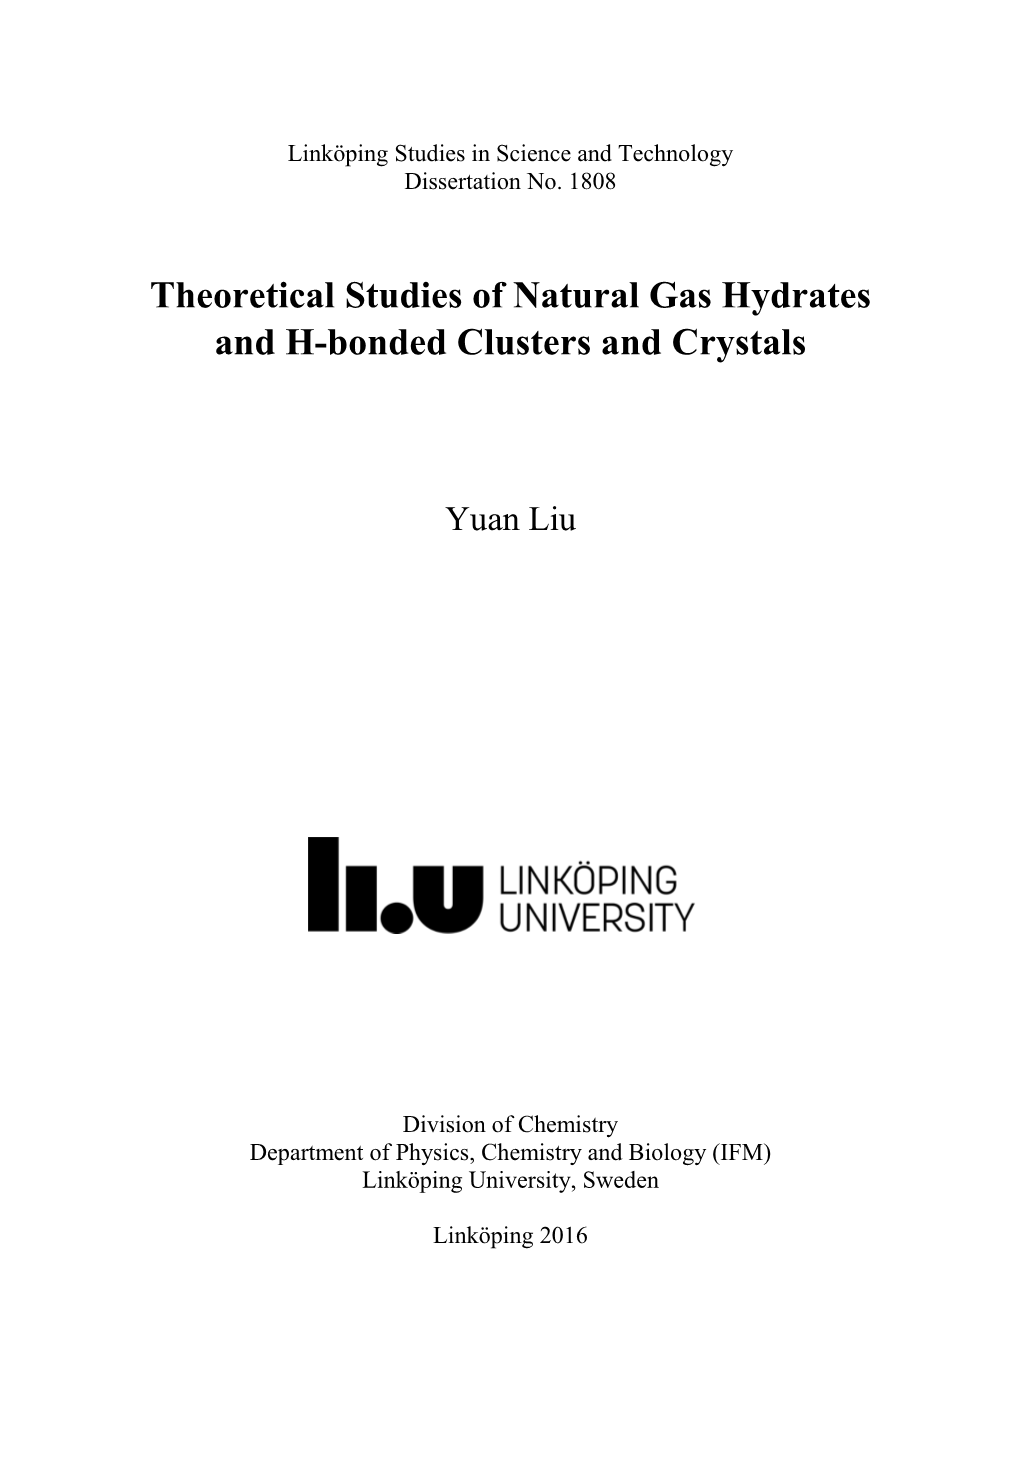 Theoretical Studies of Natural Gas Hydrates and H-Bonded Clusters and Crystals